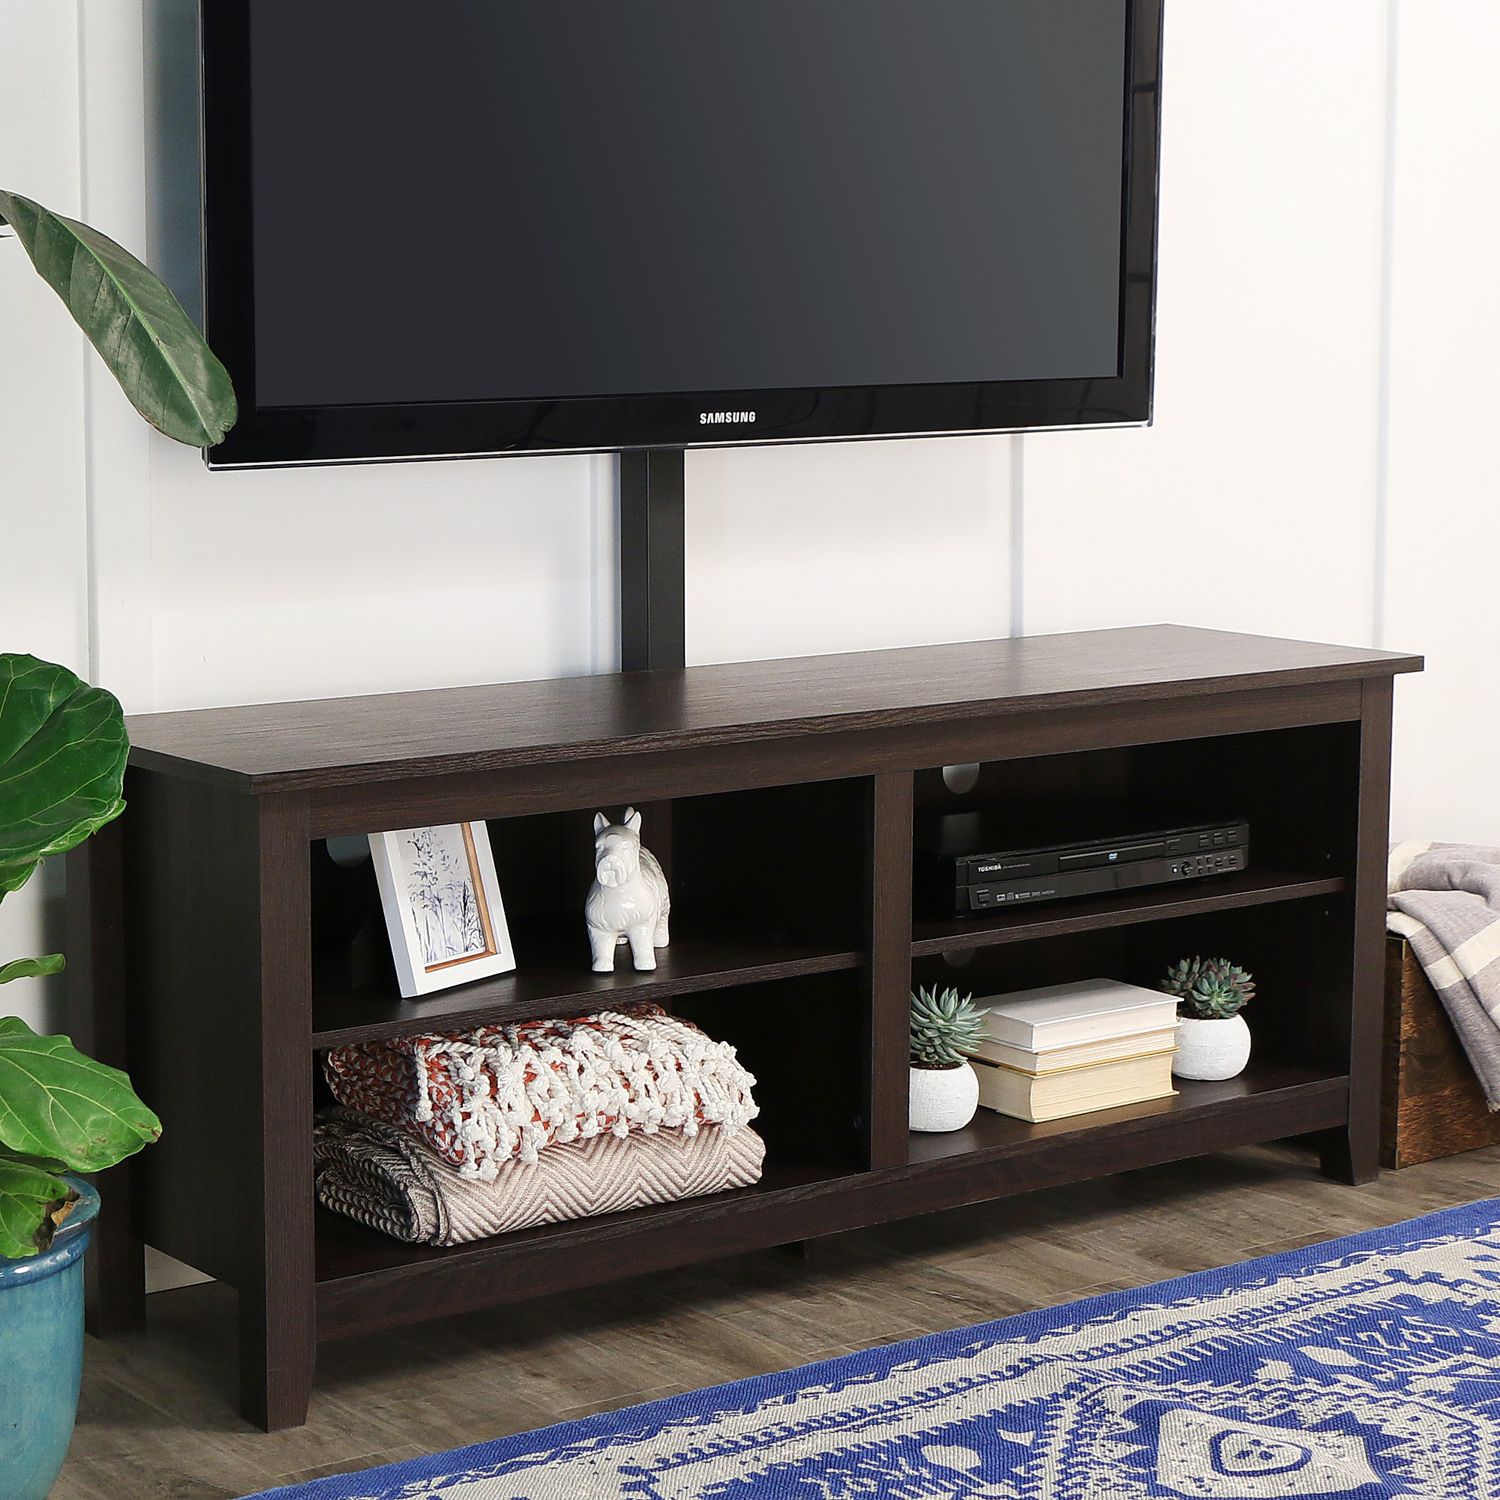 58" Espresso Tv Stand Console With Mount – Pier1 Imports For Expresso Tv Stands (View 12 of 15)